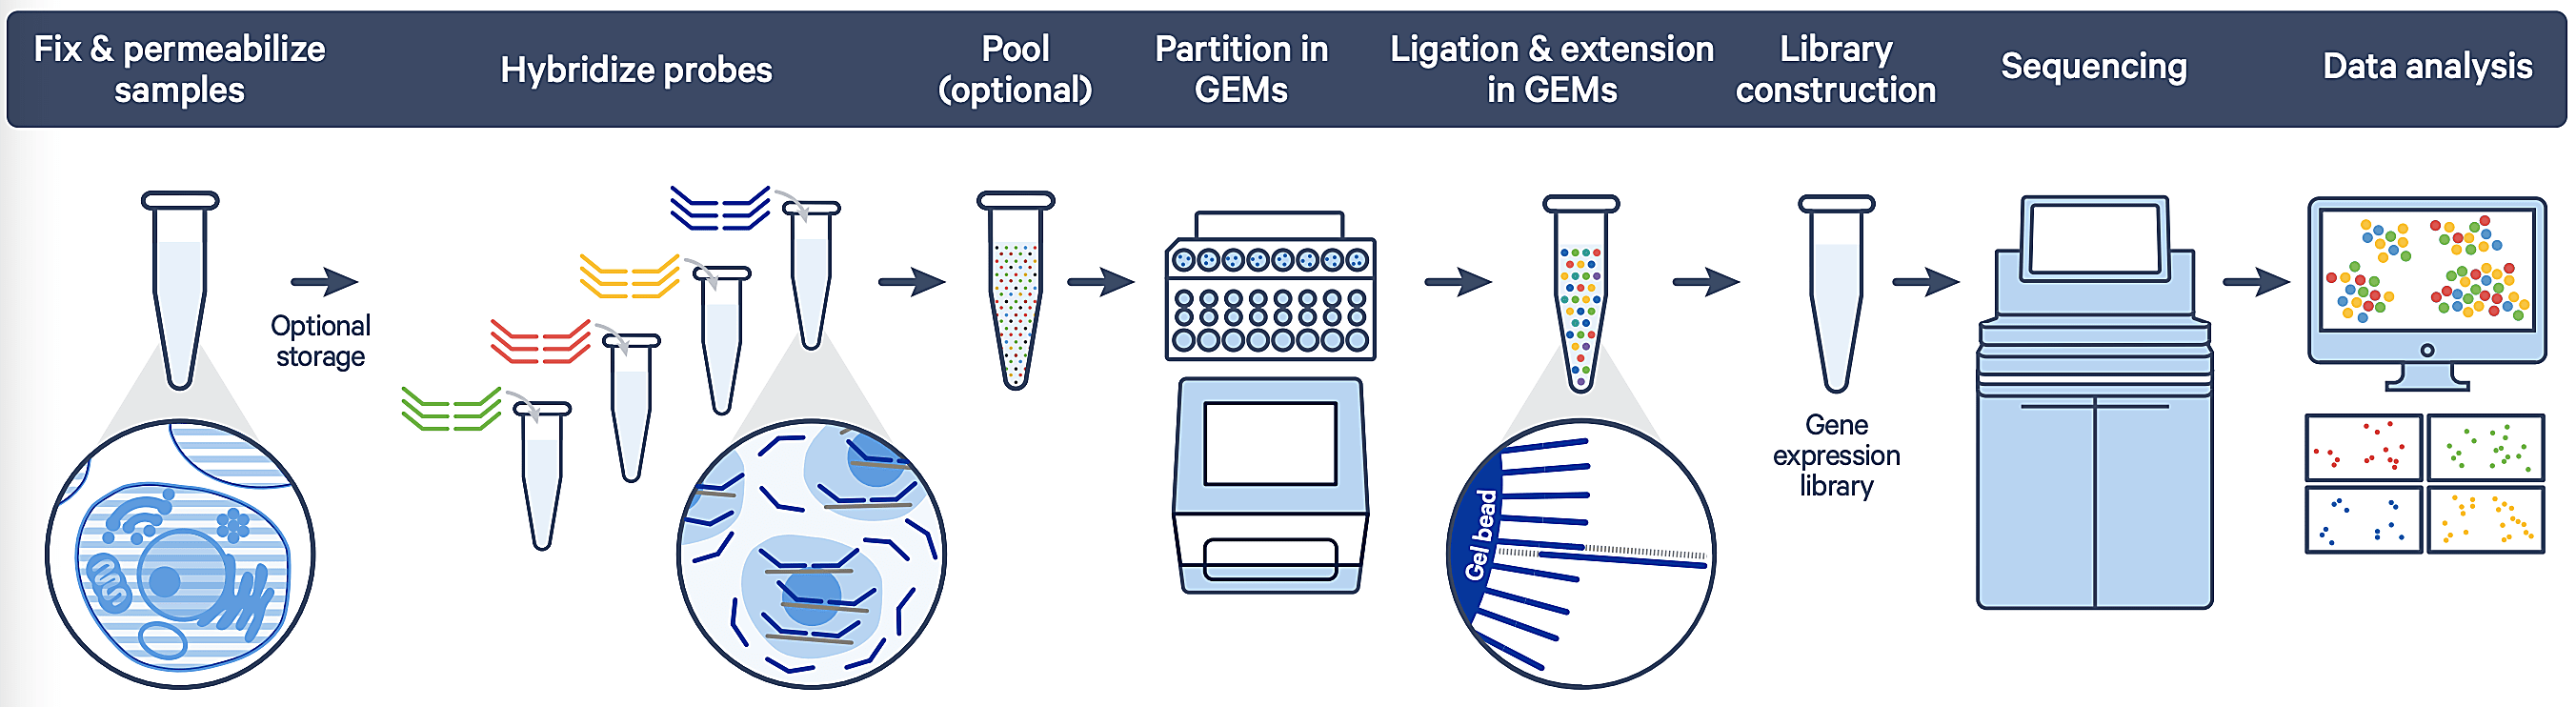 Figure 1. Overview of the fixed RNA protocol with barcoded probe templates.